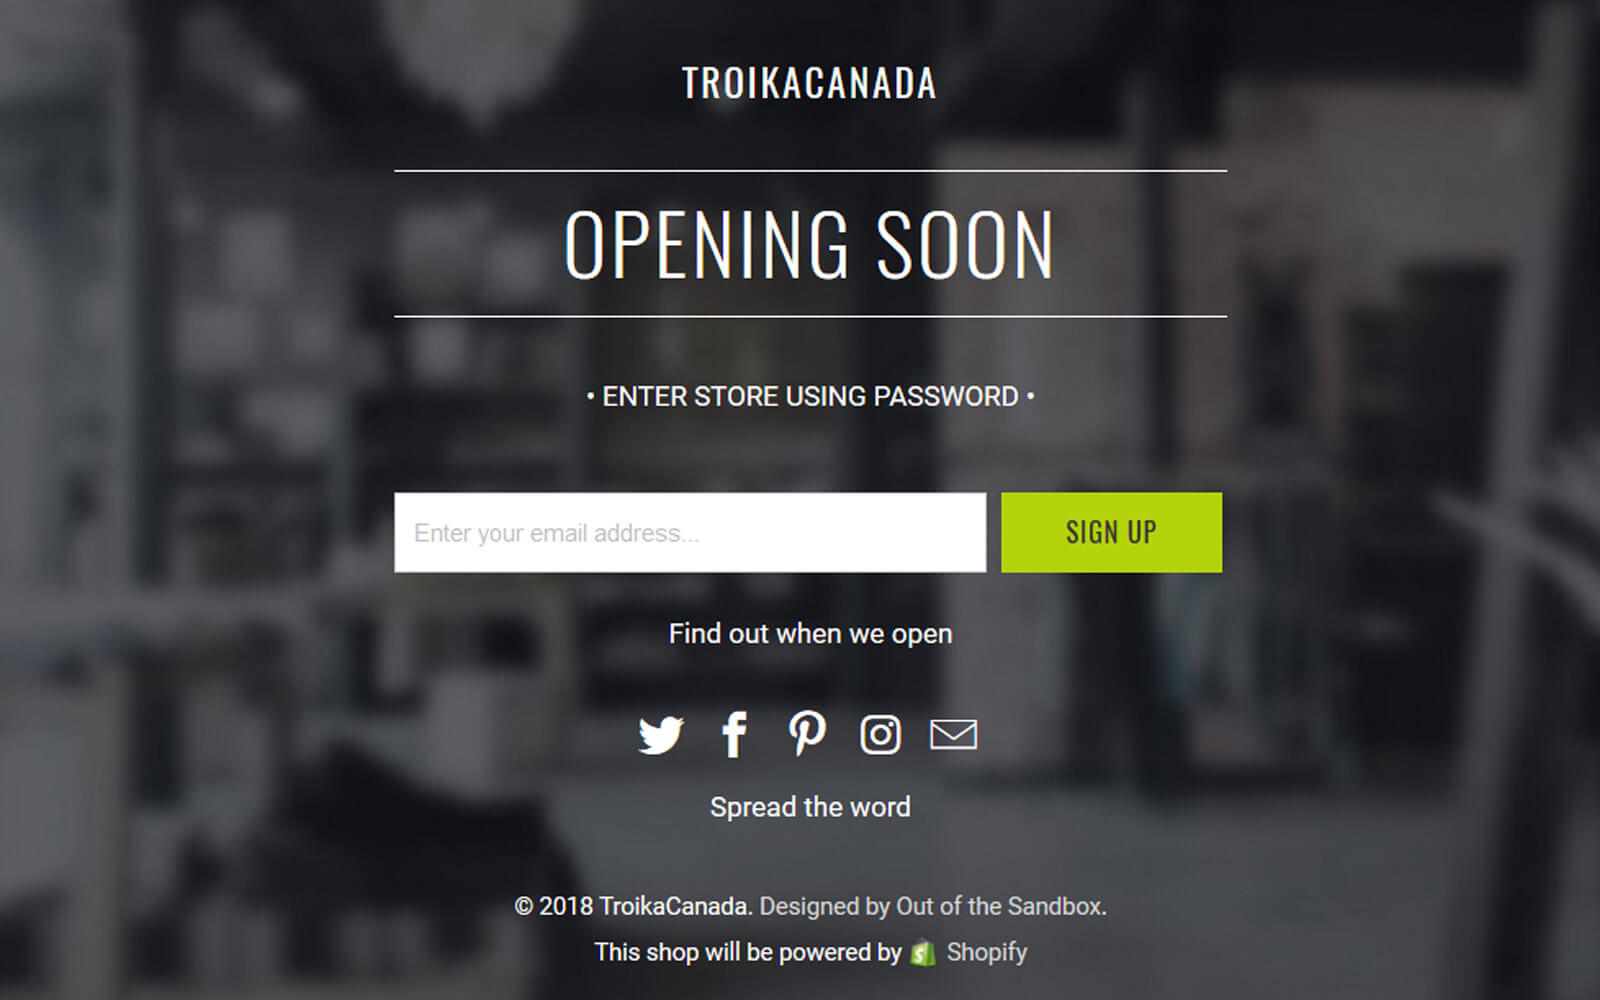 ATTENTION - TROIKA PRODUCT LAUNCHE IS COMING UP SOON!